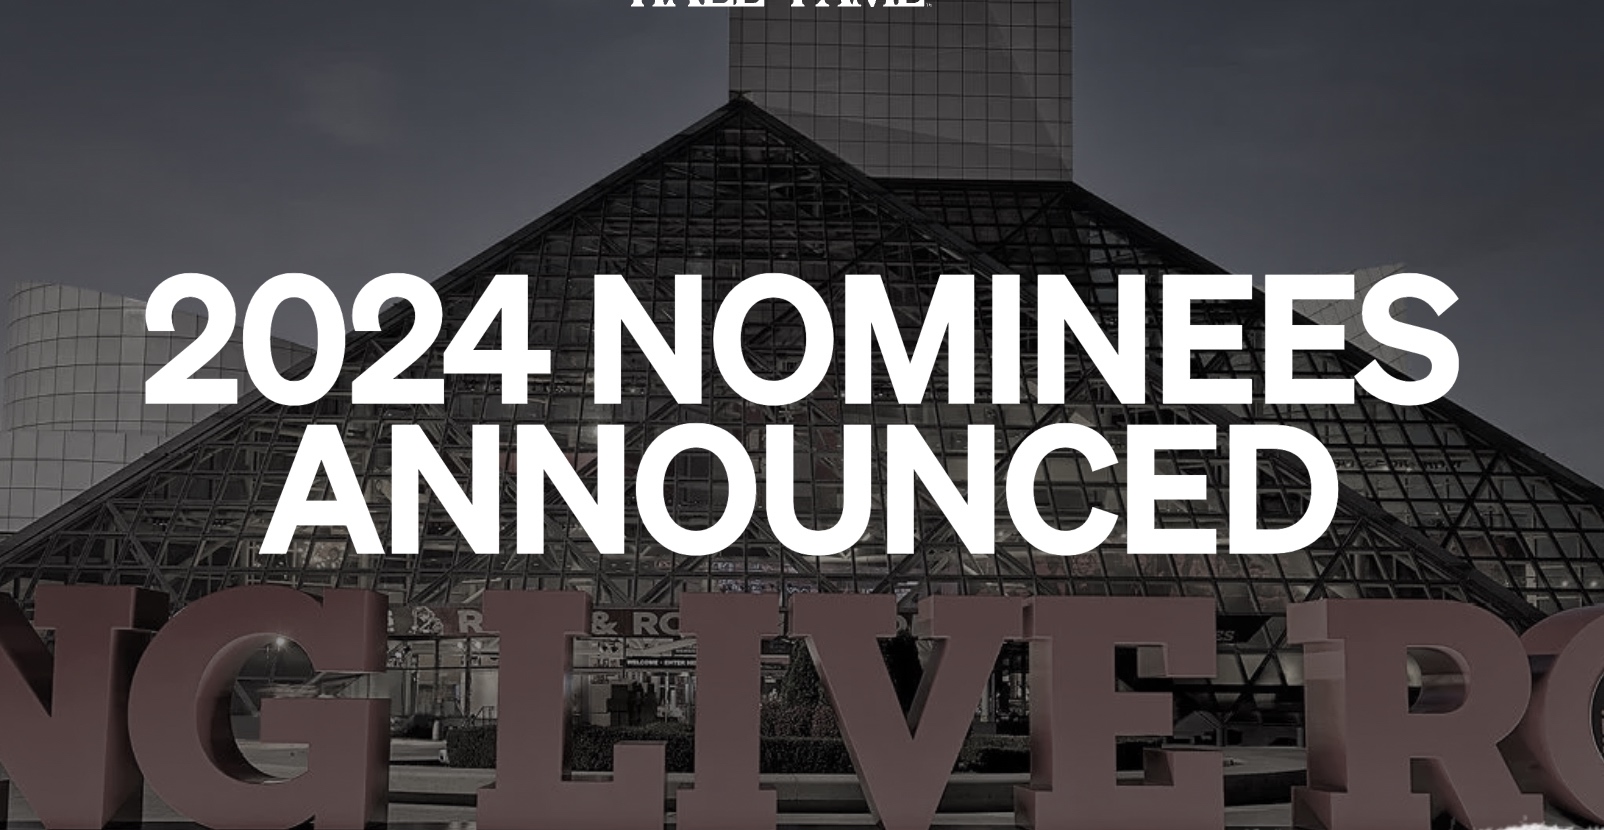 The Rock & Roll Hall of Fame Foundation Announced Nominees for 2024 Induction